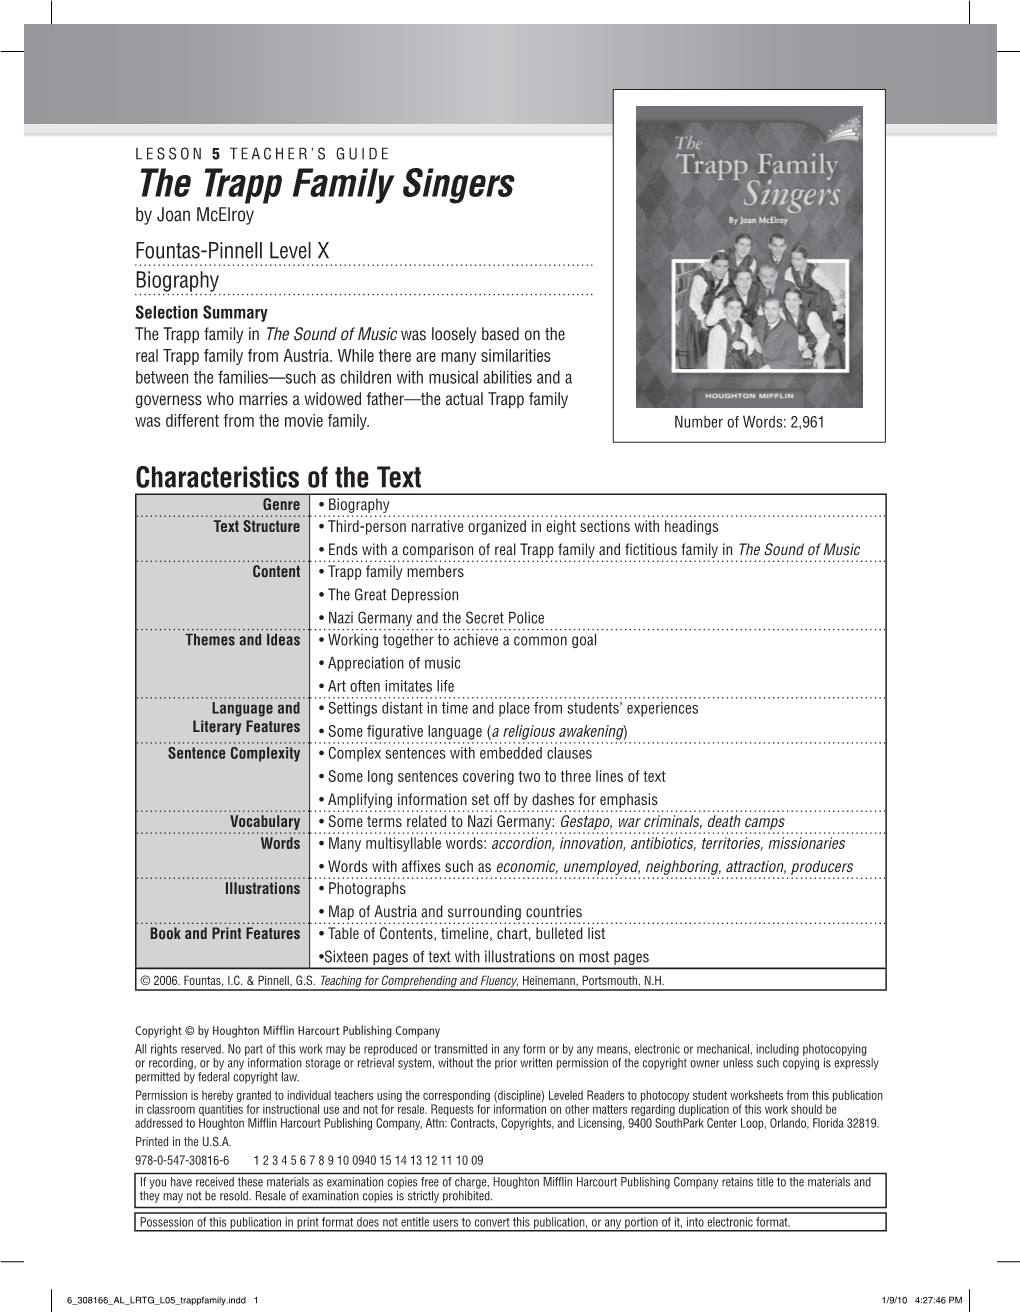 The Trapp Family Singers